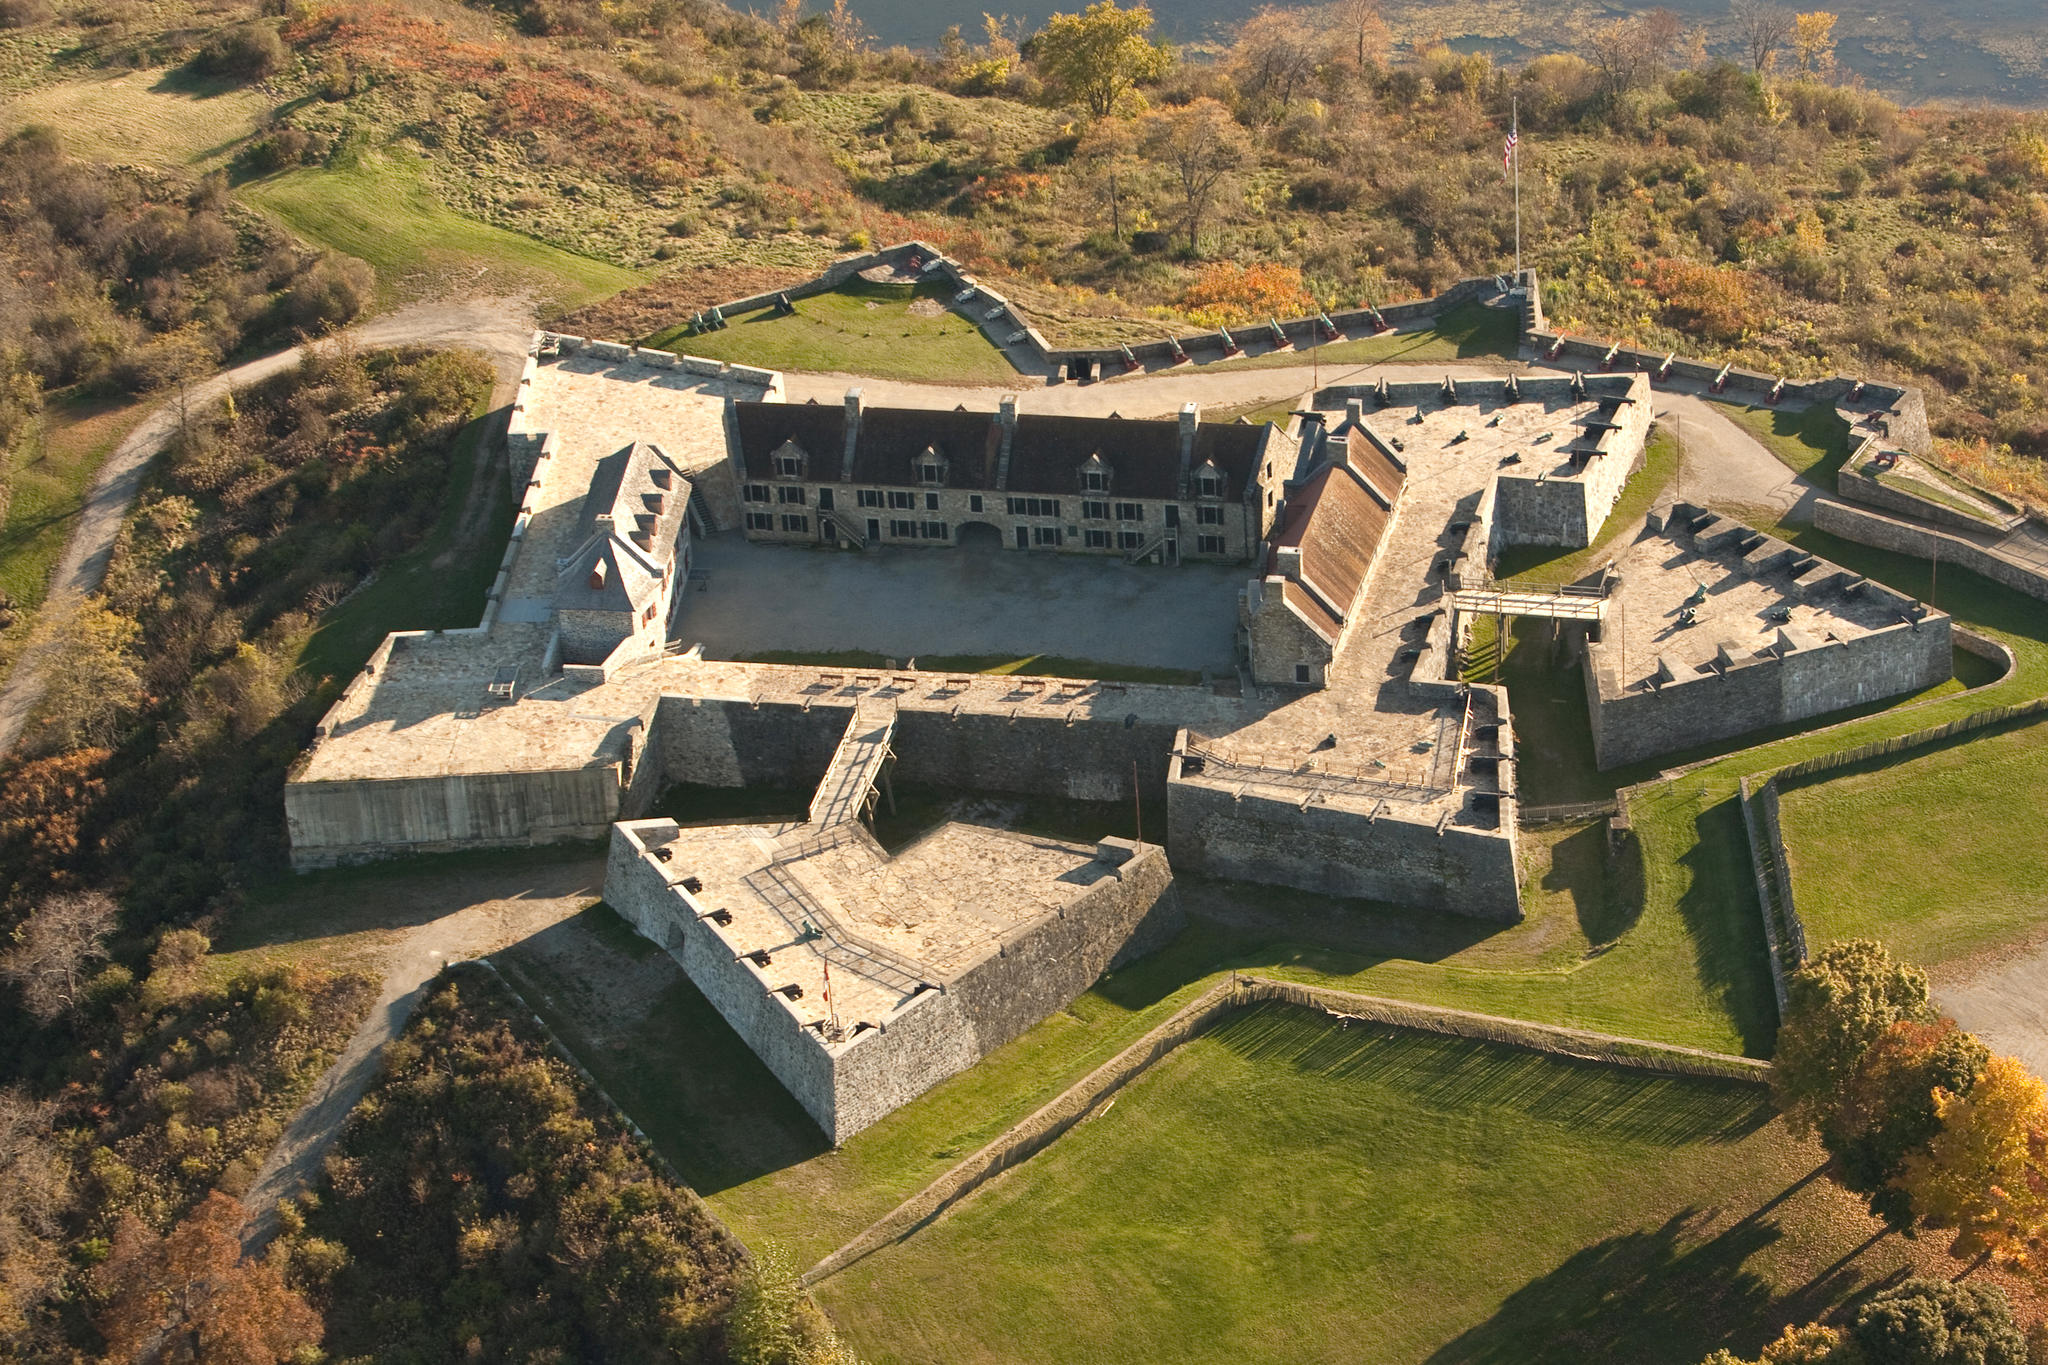 Fort Ti aerial view